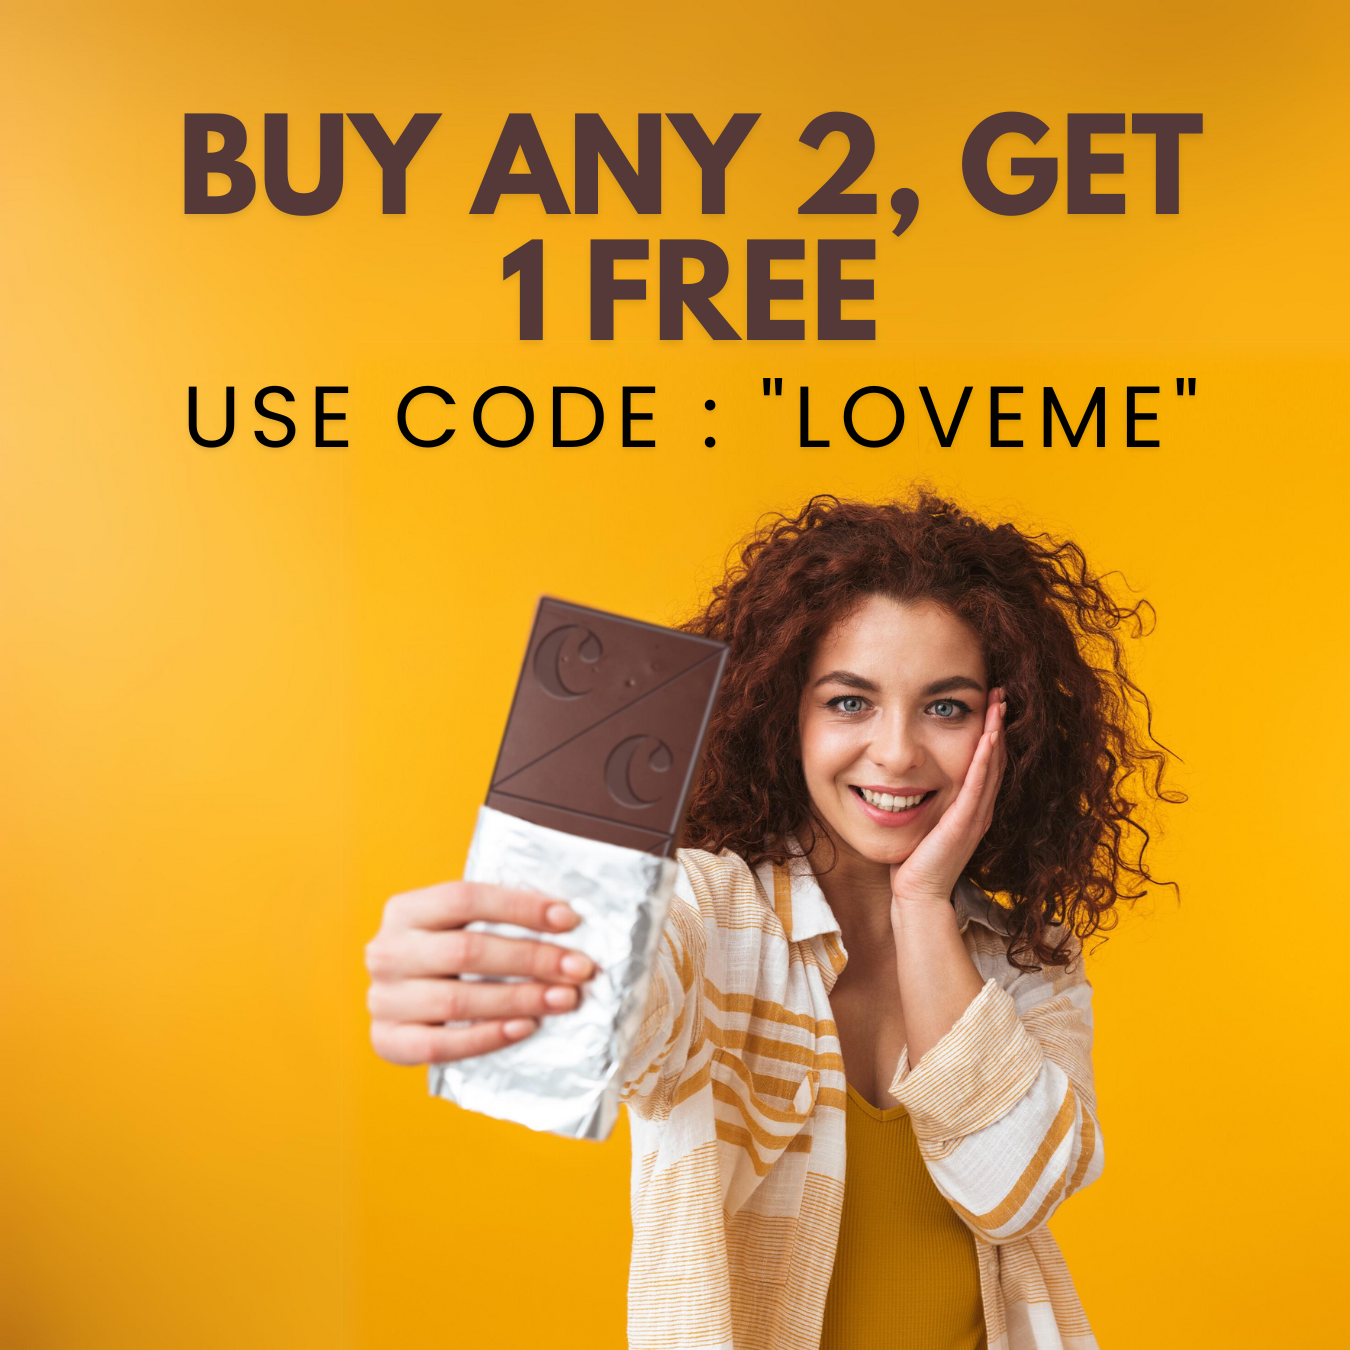 Sweeten Your Relationship with TheCocoLove: Buy 2 Get 1 Free Couple Chocolate Gift Deal!